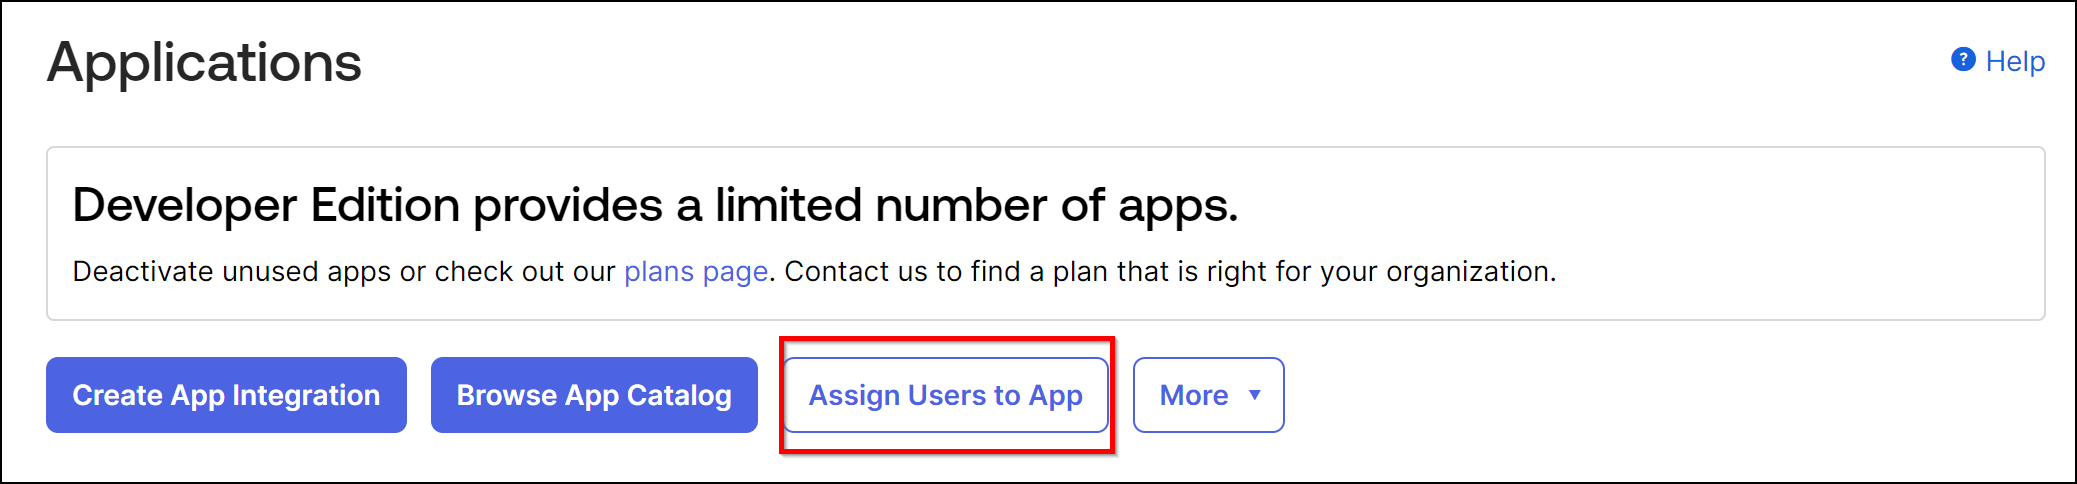 Assign users to app